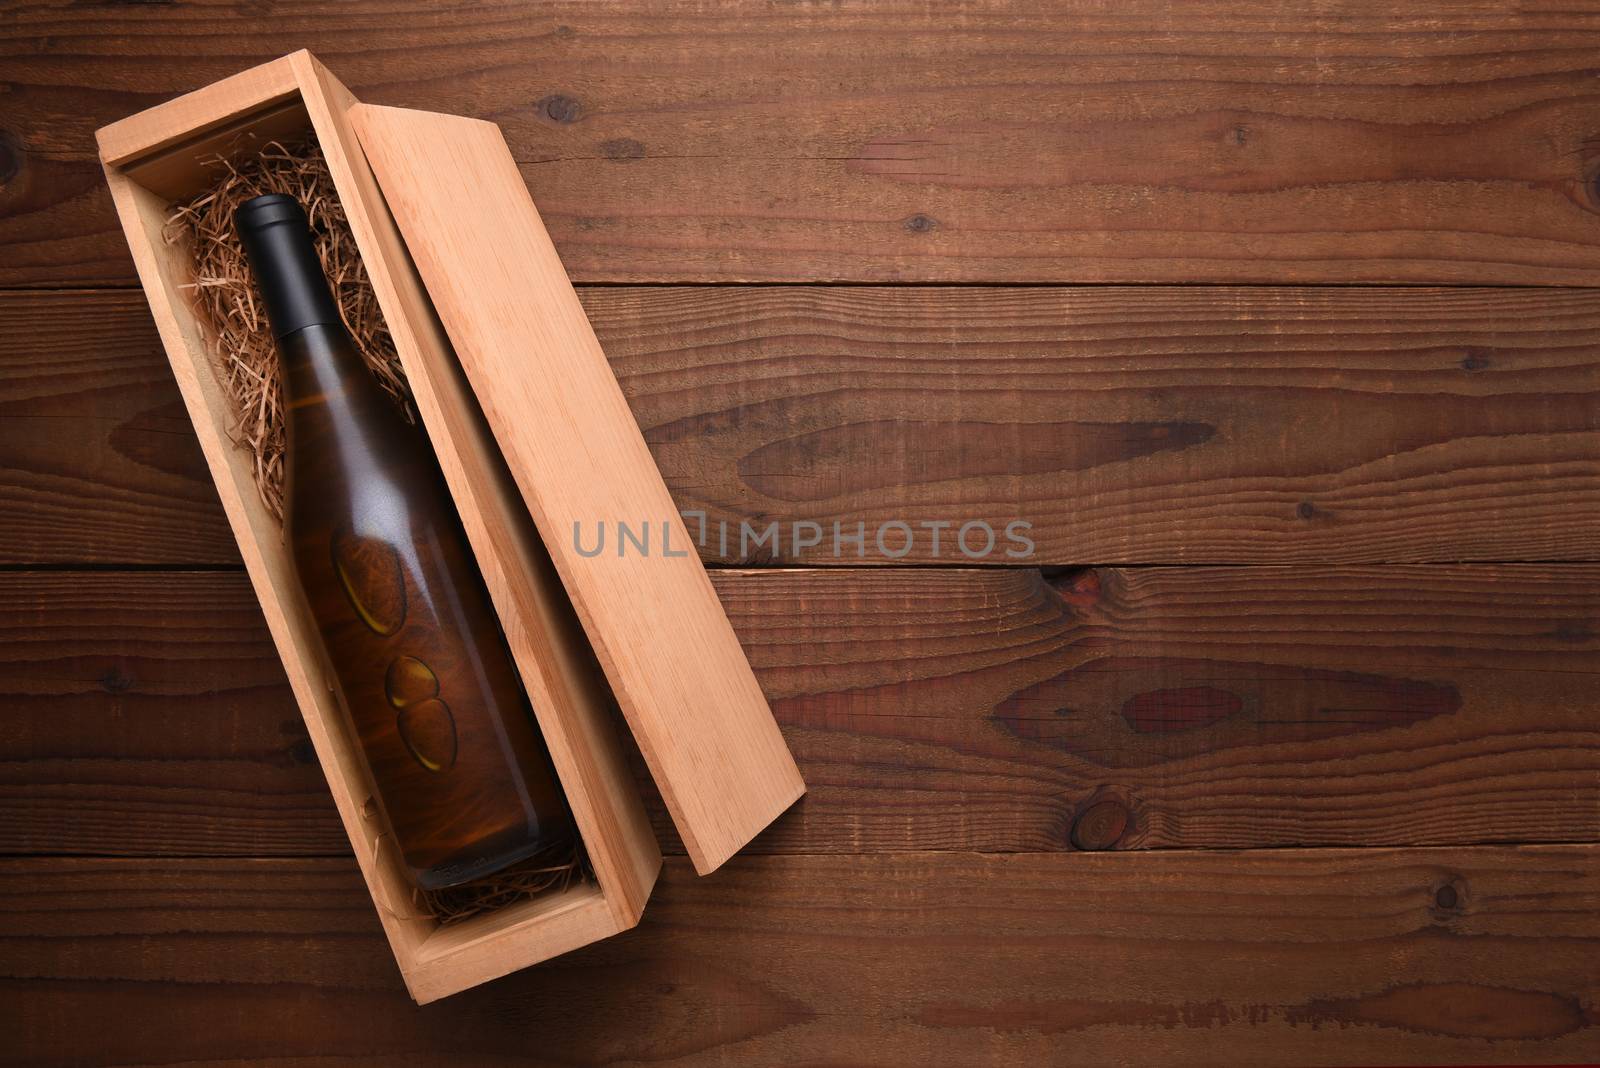 Chardonnay Wine Box: A single Bottle of Chardonnay wine in its wooden case on a dark wood table with copy space.